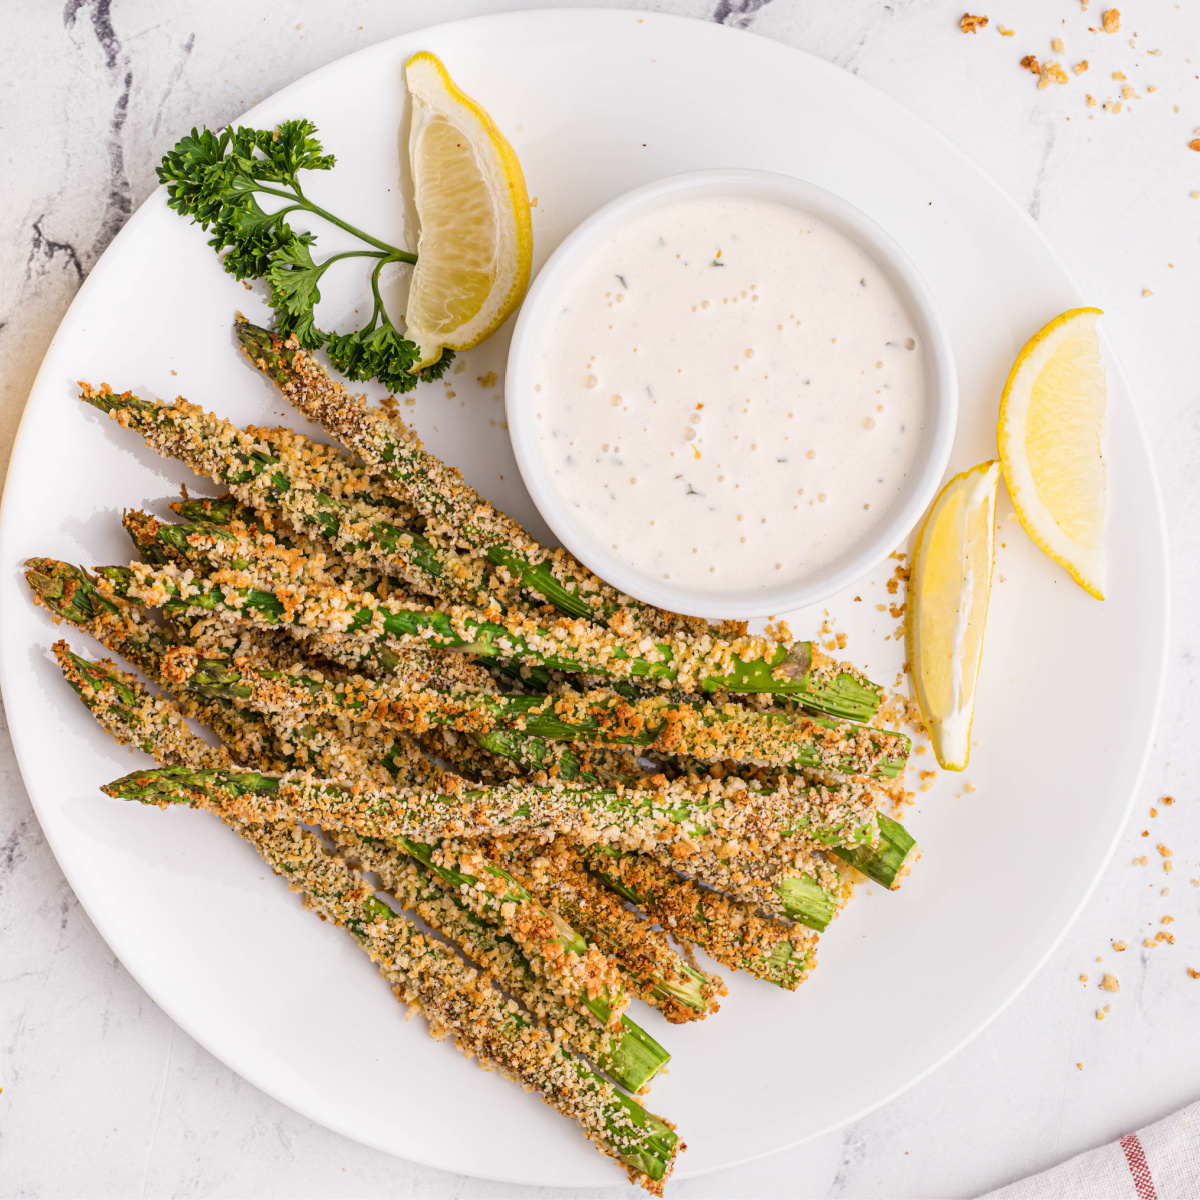 Plated air fried asparagus fries with lemon wedges and dipping sauce.